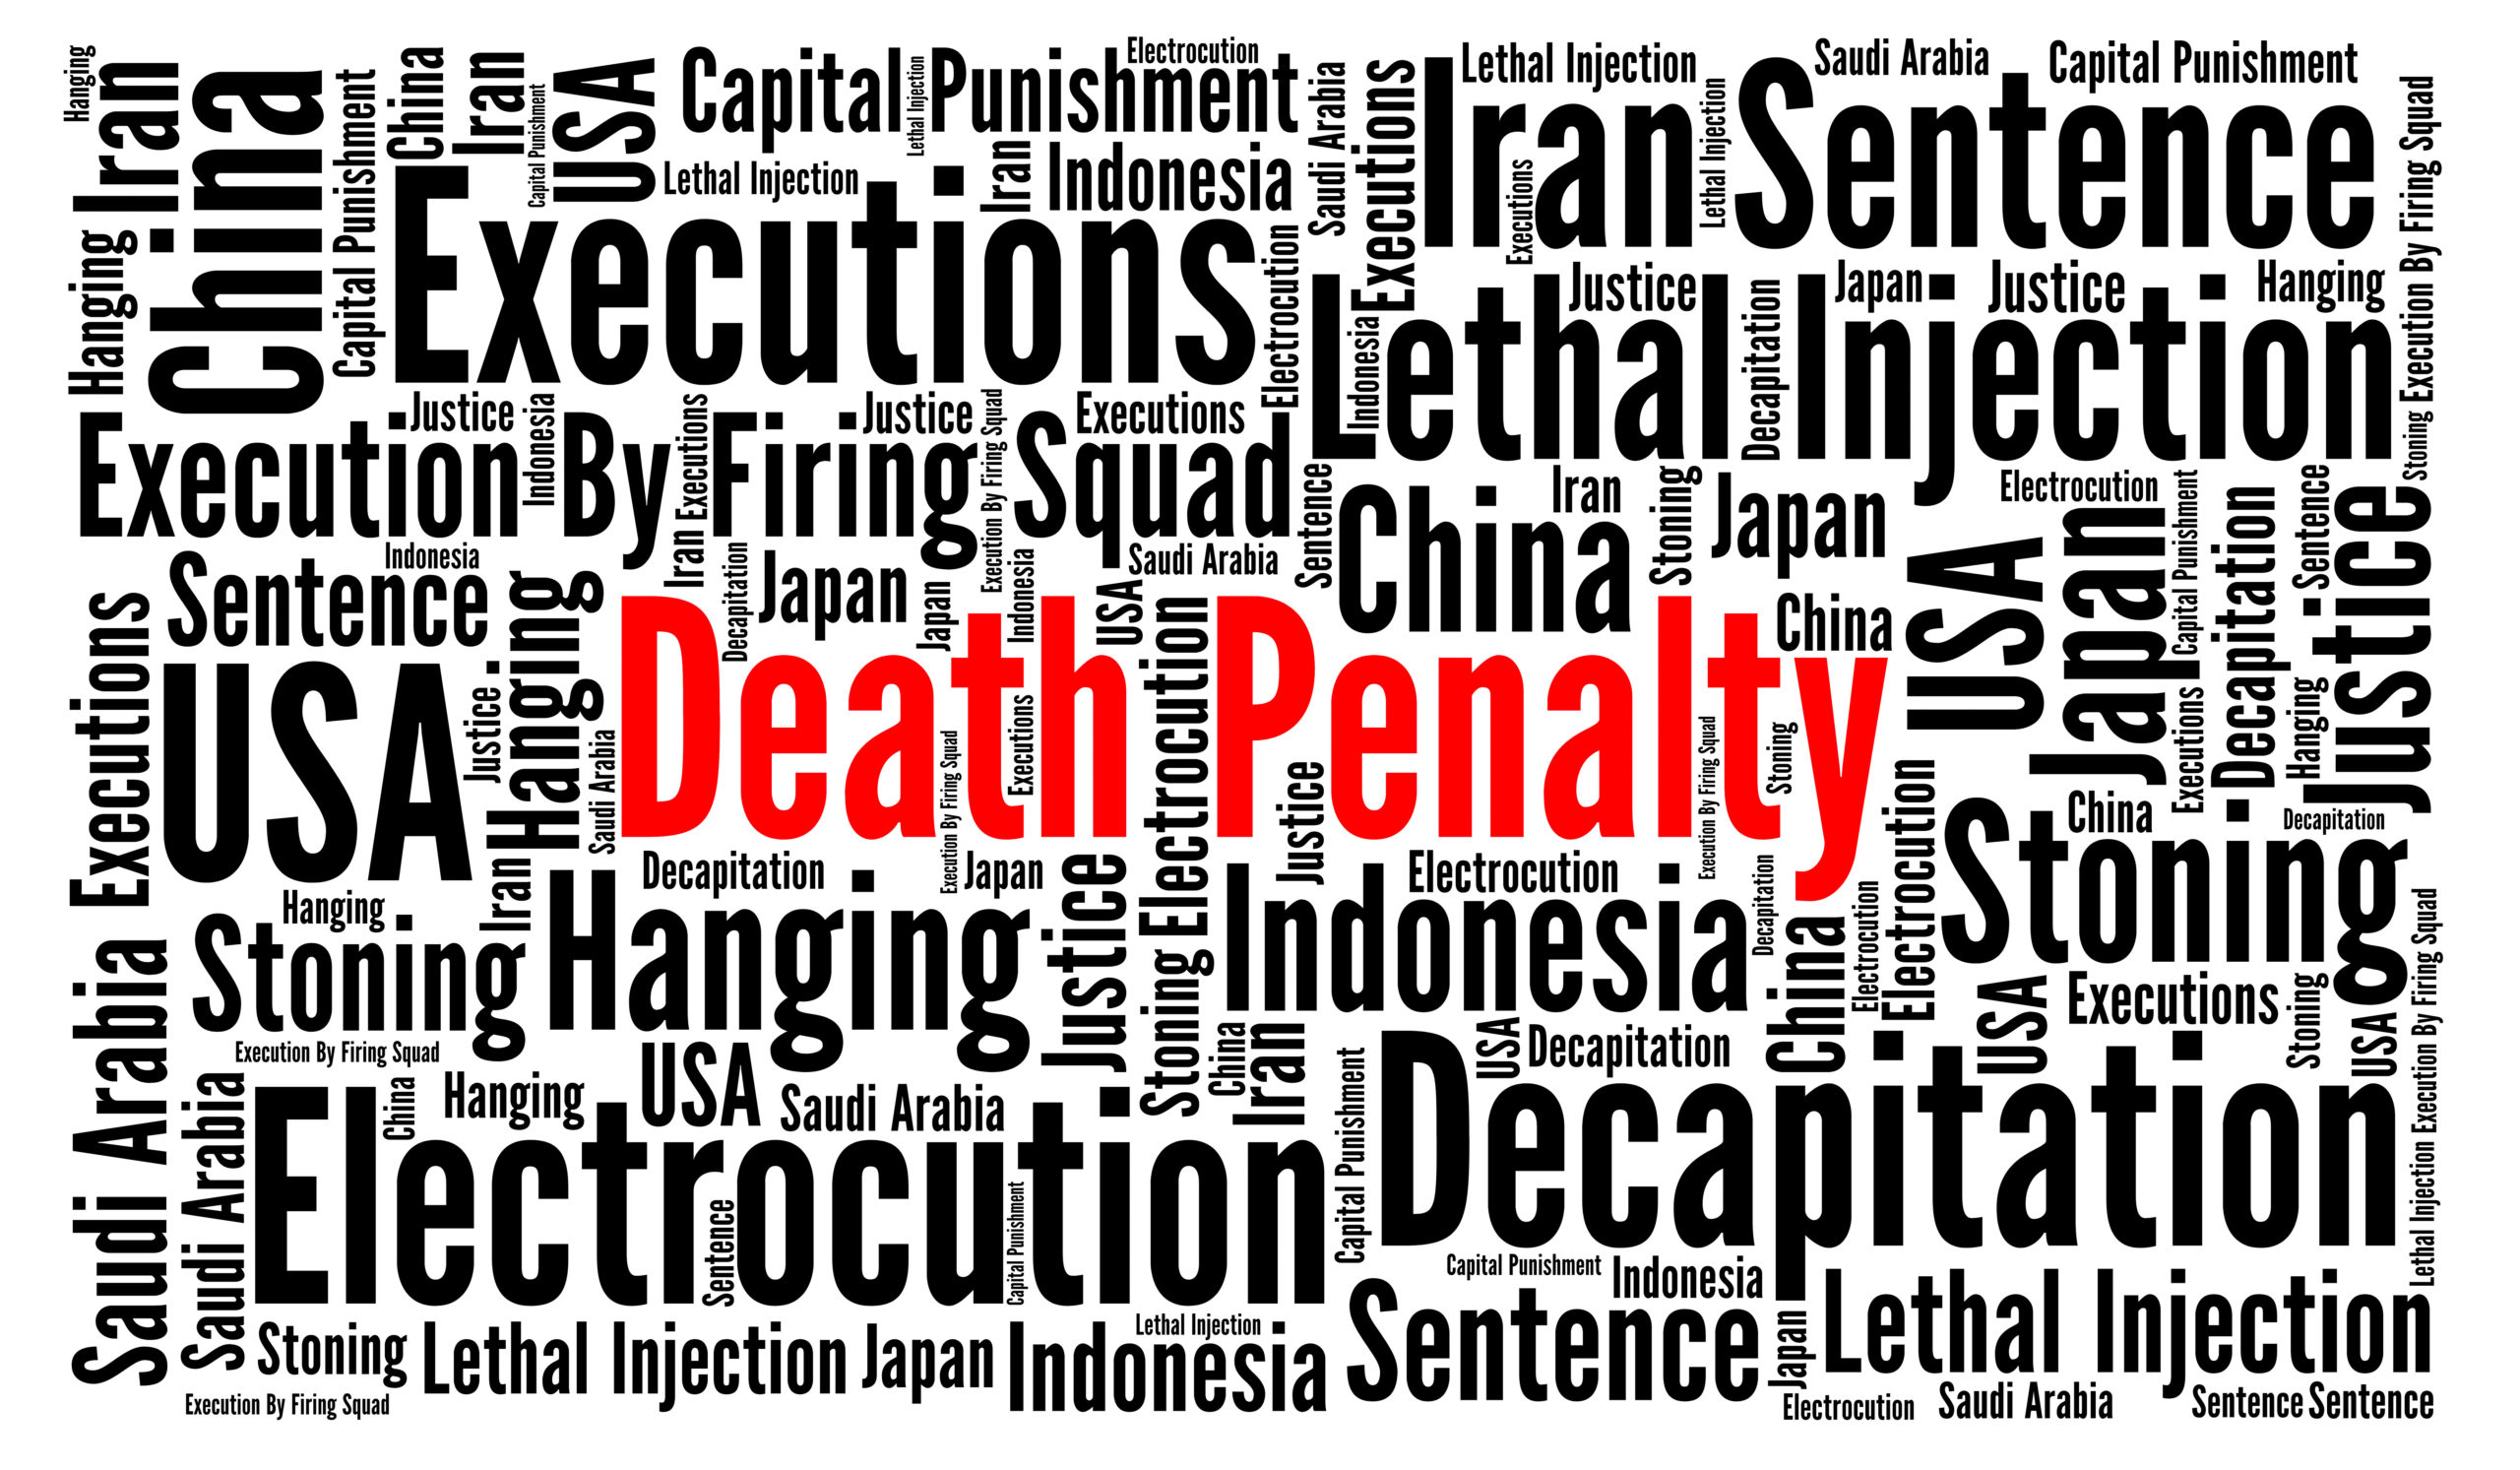 What are 5 Facts About the Death Penalty